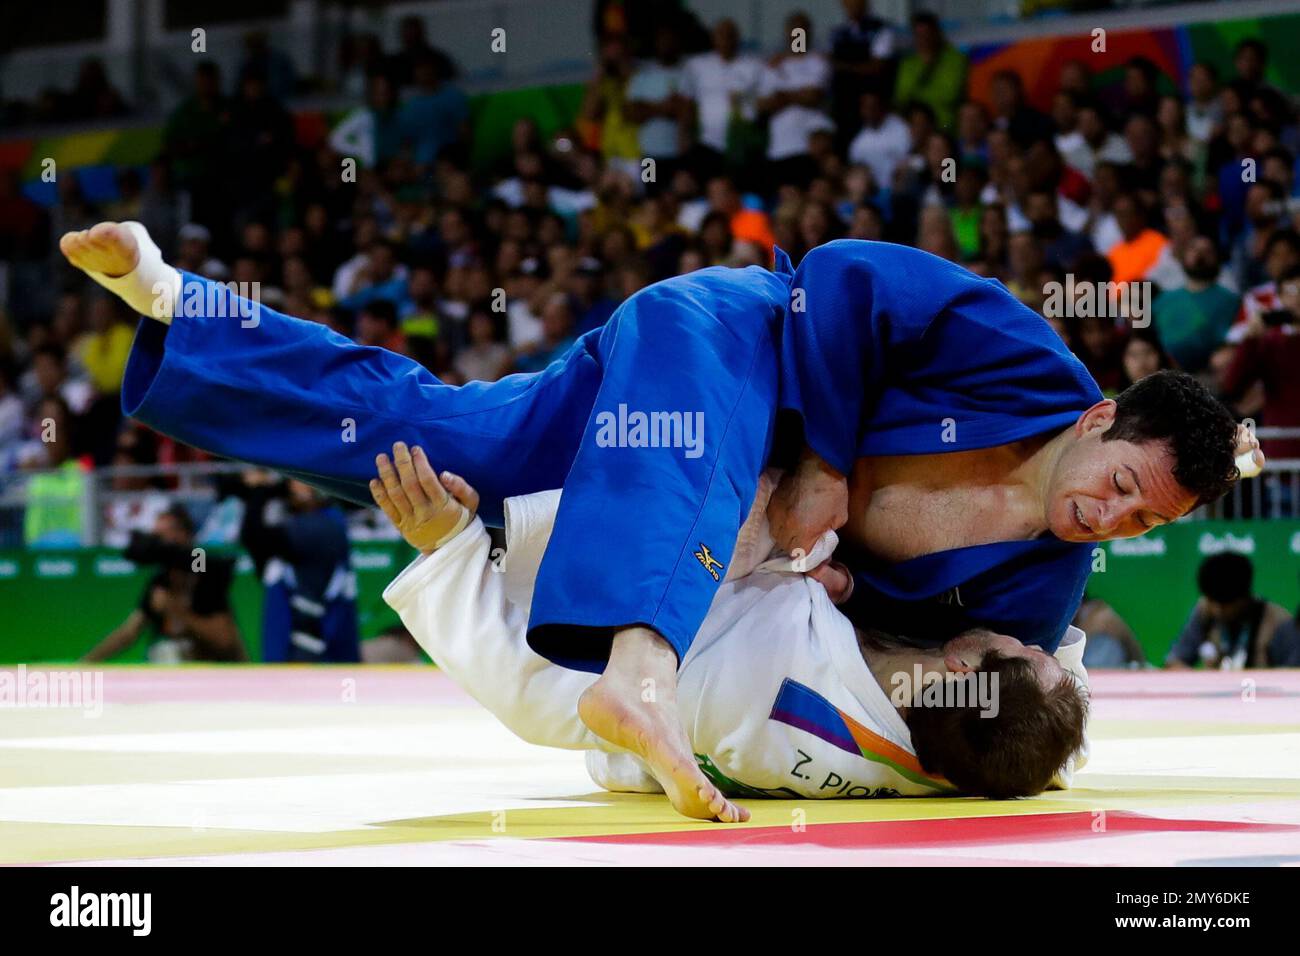 Brazil's Tiago Camilo competes against South Africa's Zack Piontek during the men's 90-kg judo competition at at the 2016 Summer Olympics in Rio de Janeiro, Brazil, Wednesday, Aug. 10, 2016. (AP Photo/Markus Schreiber) Stock Photo